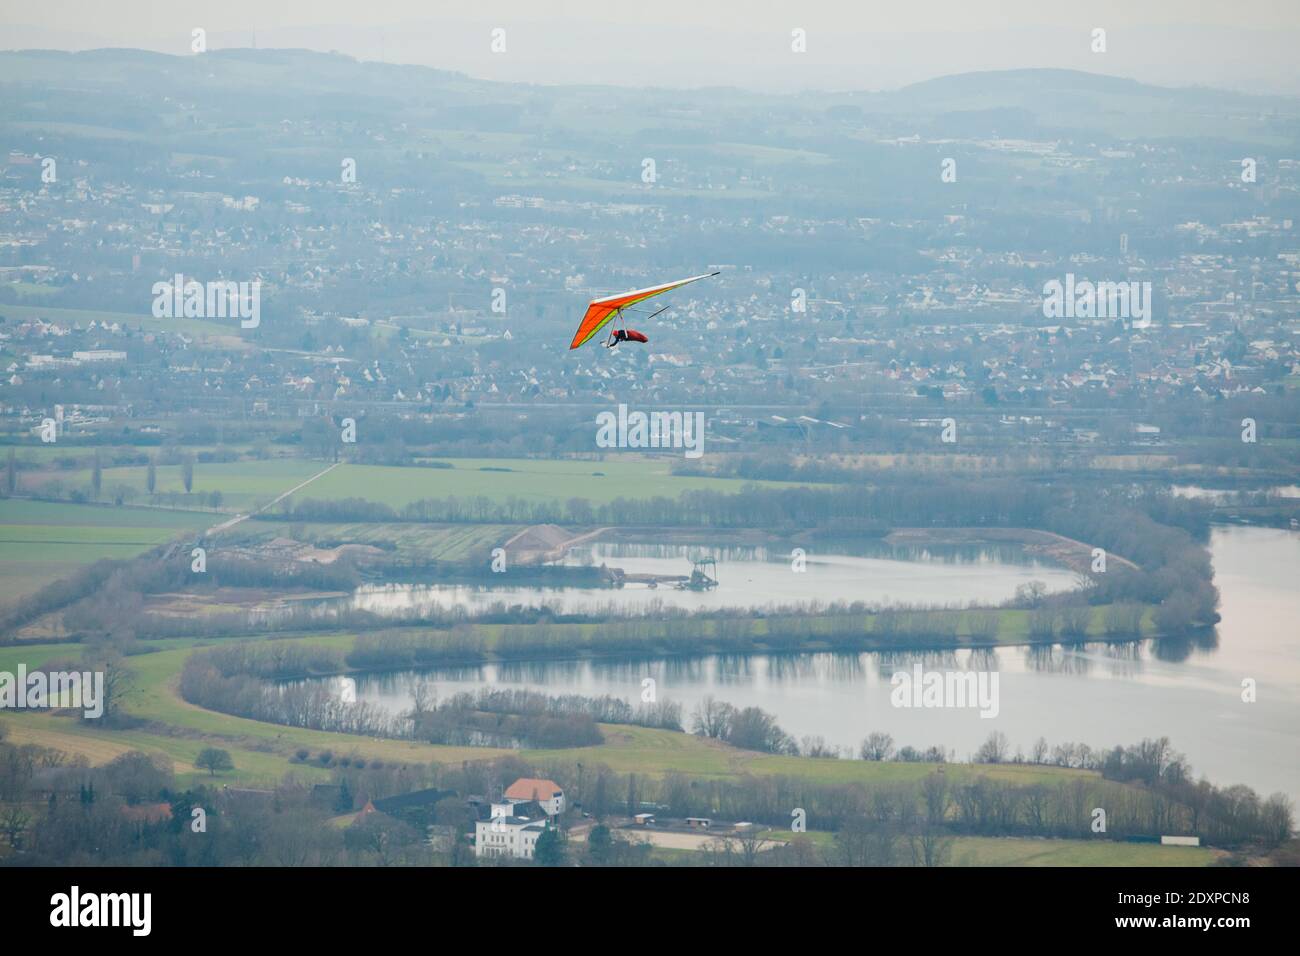 Hang glider in the air on a sunny day. Stock Photo